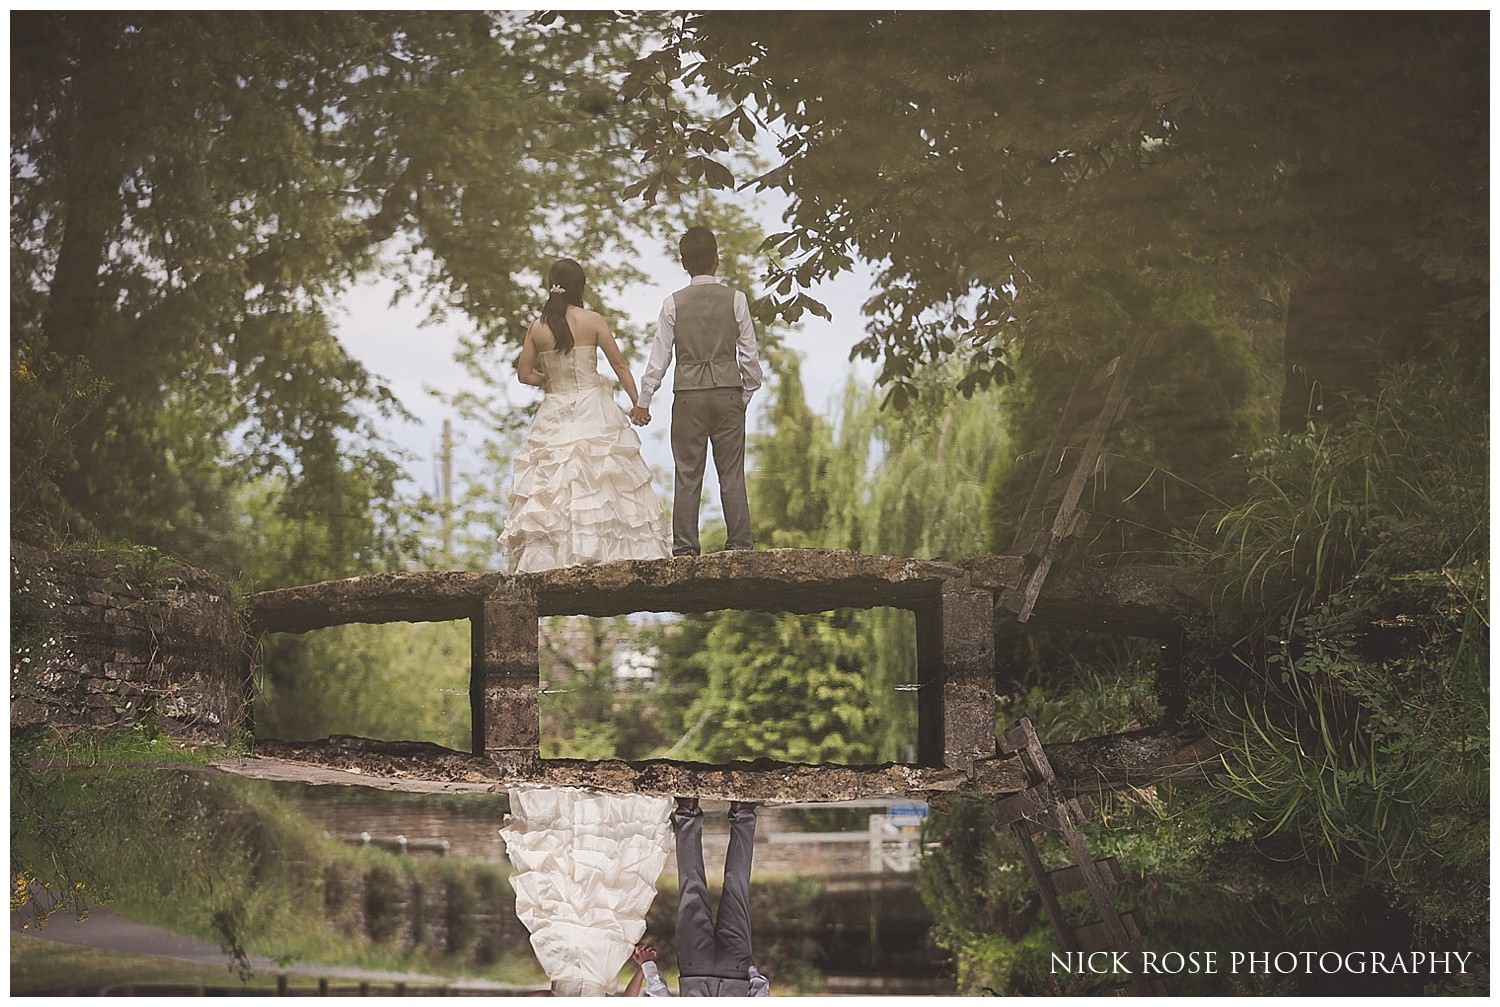  Reflection of a bride and groom in a stream during a pre wedding photography session in Lower Slaughter in the Cotswolds countryside UK 